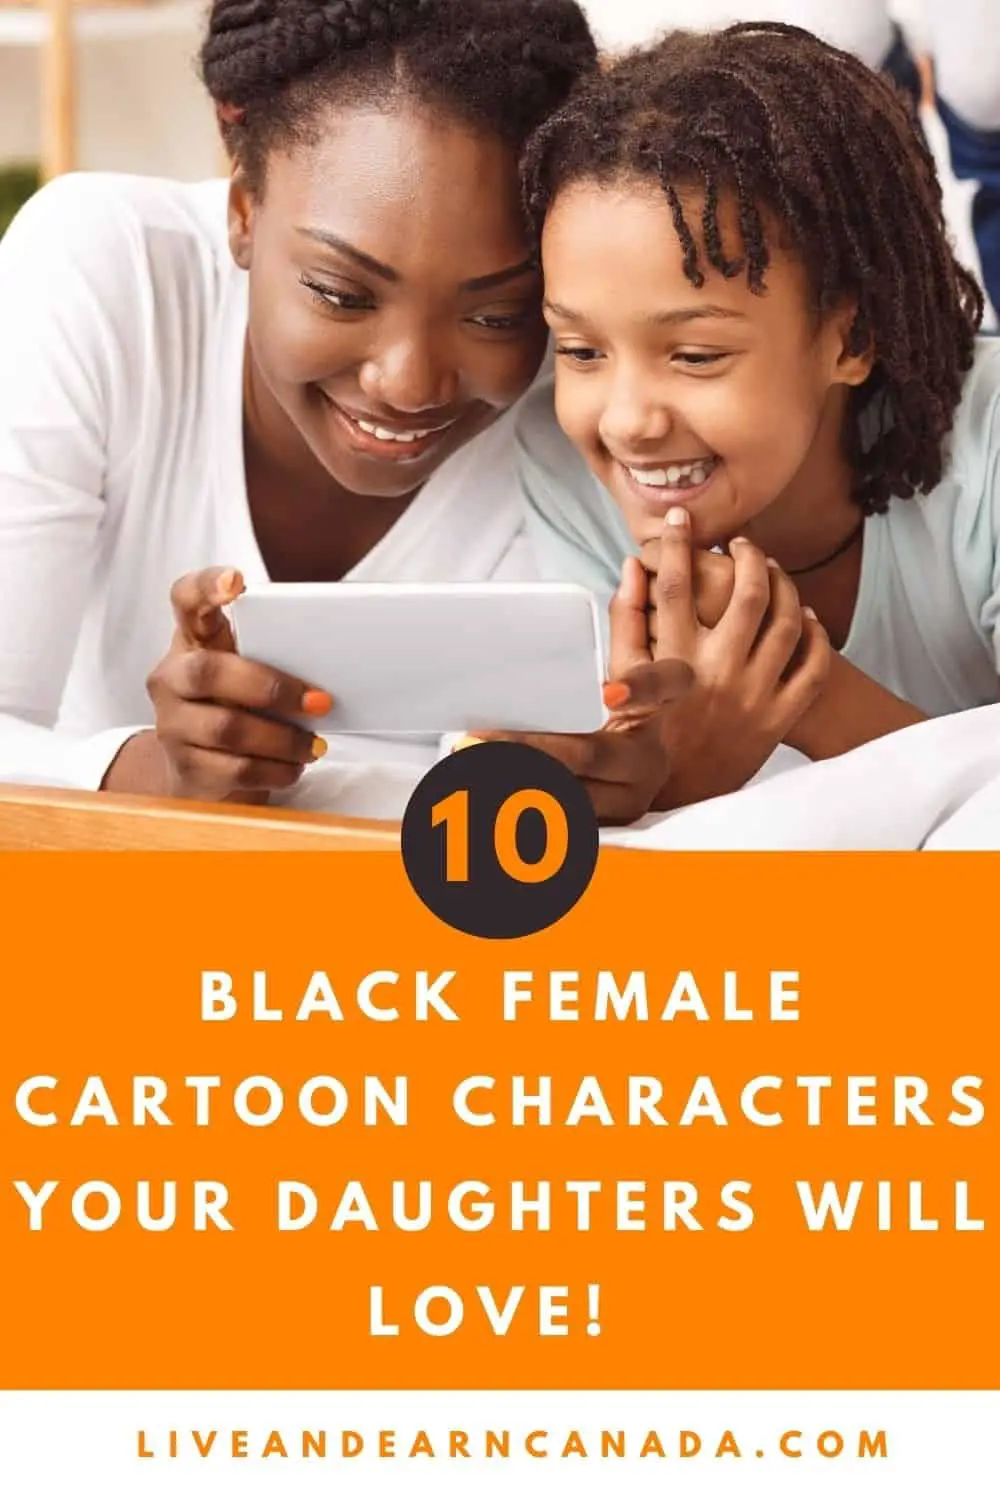 Top 10 Black Female Cartoon Characters! There are several Black female cartoon characters I used to watch as a kid. Now that I have a daughter, I want to introduce her to Black Girl Cartoon Characters! If you had to pick your top 10 favorite Black female cartoon characters who would they be?